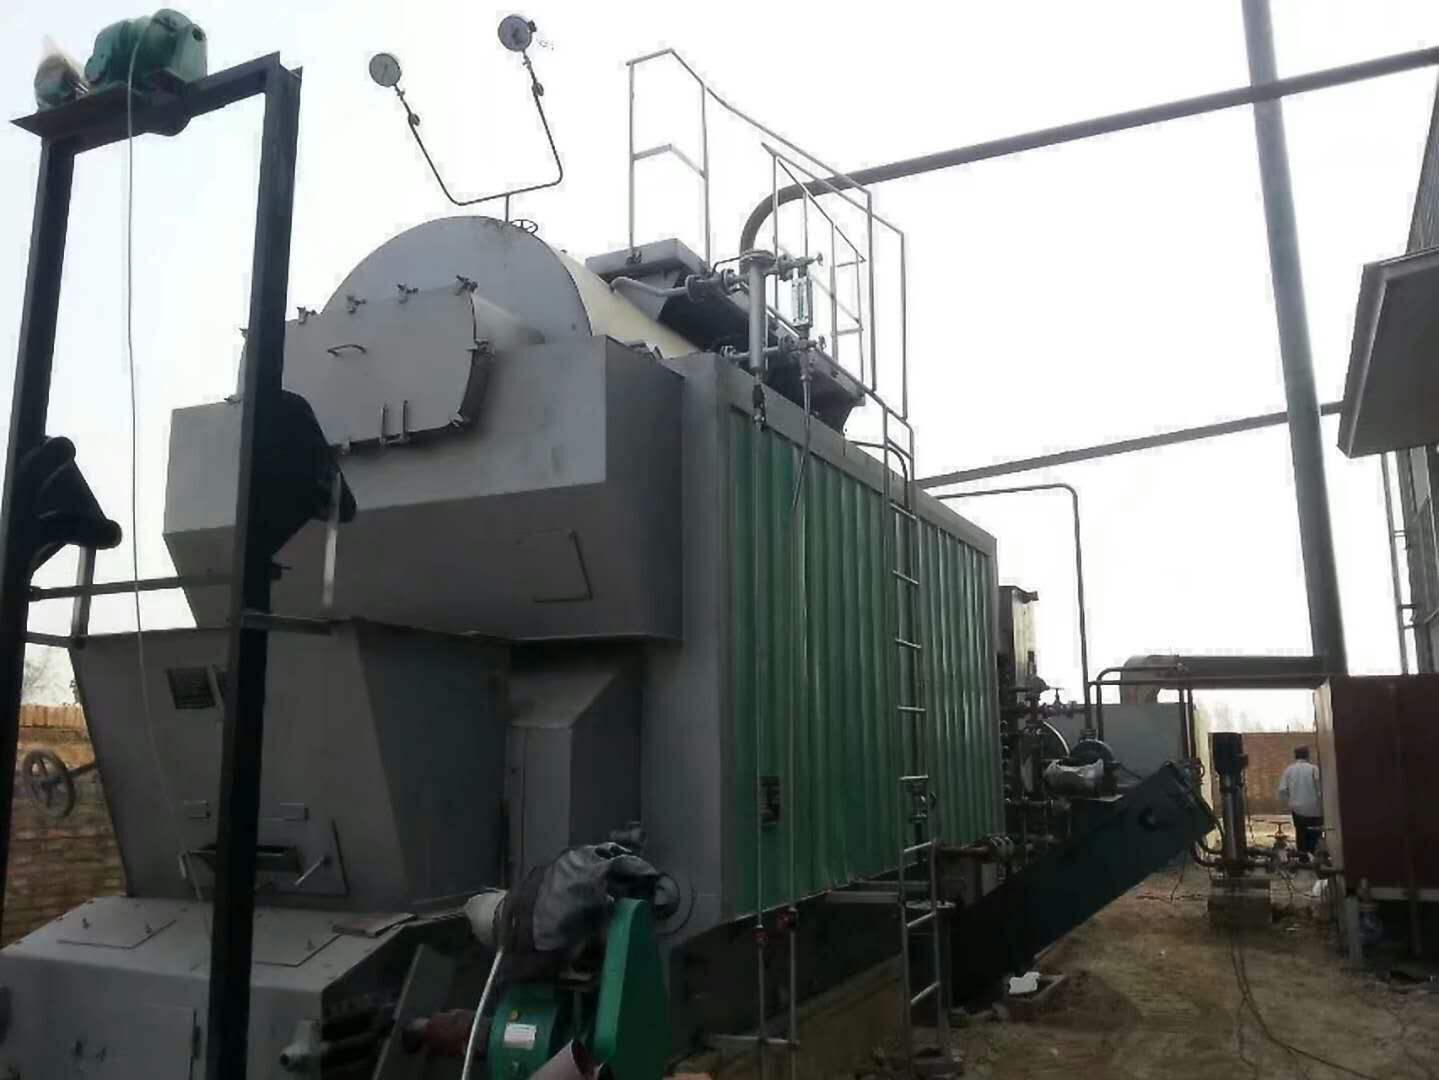 0.5 ton industrial coal fired steam boiler with travelling chain grate stoker